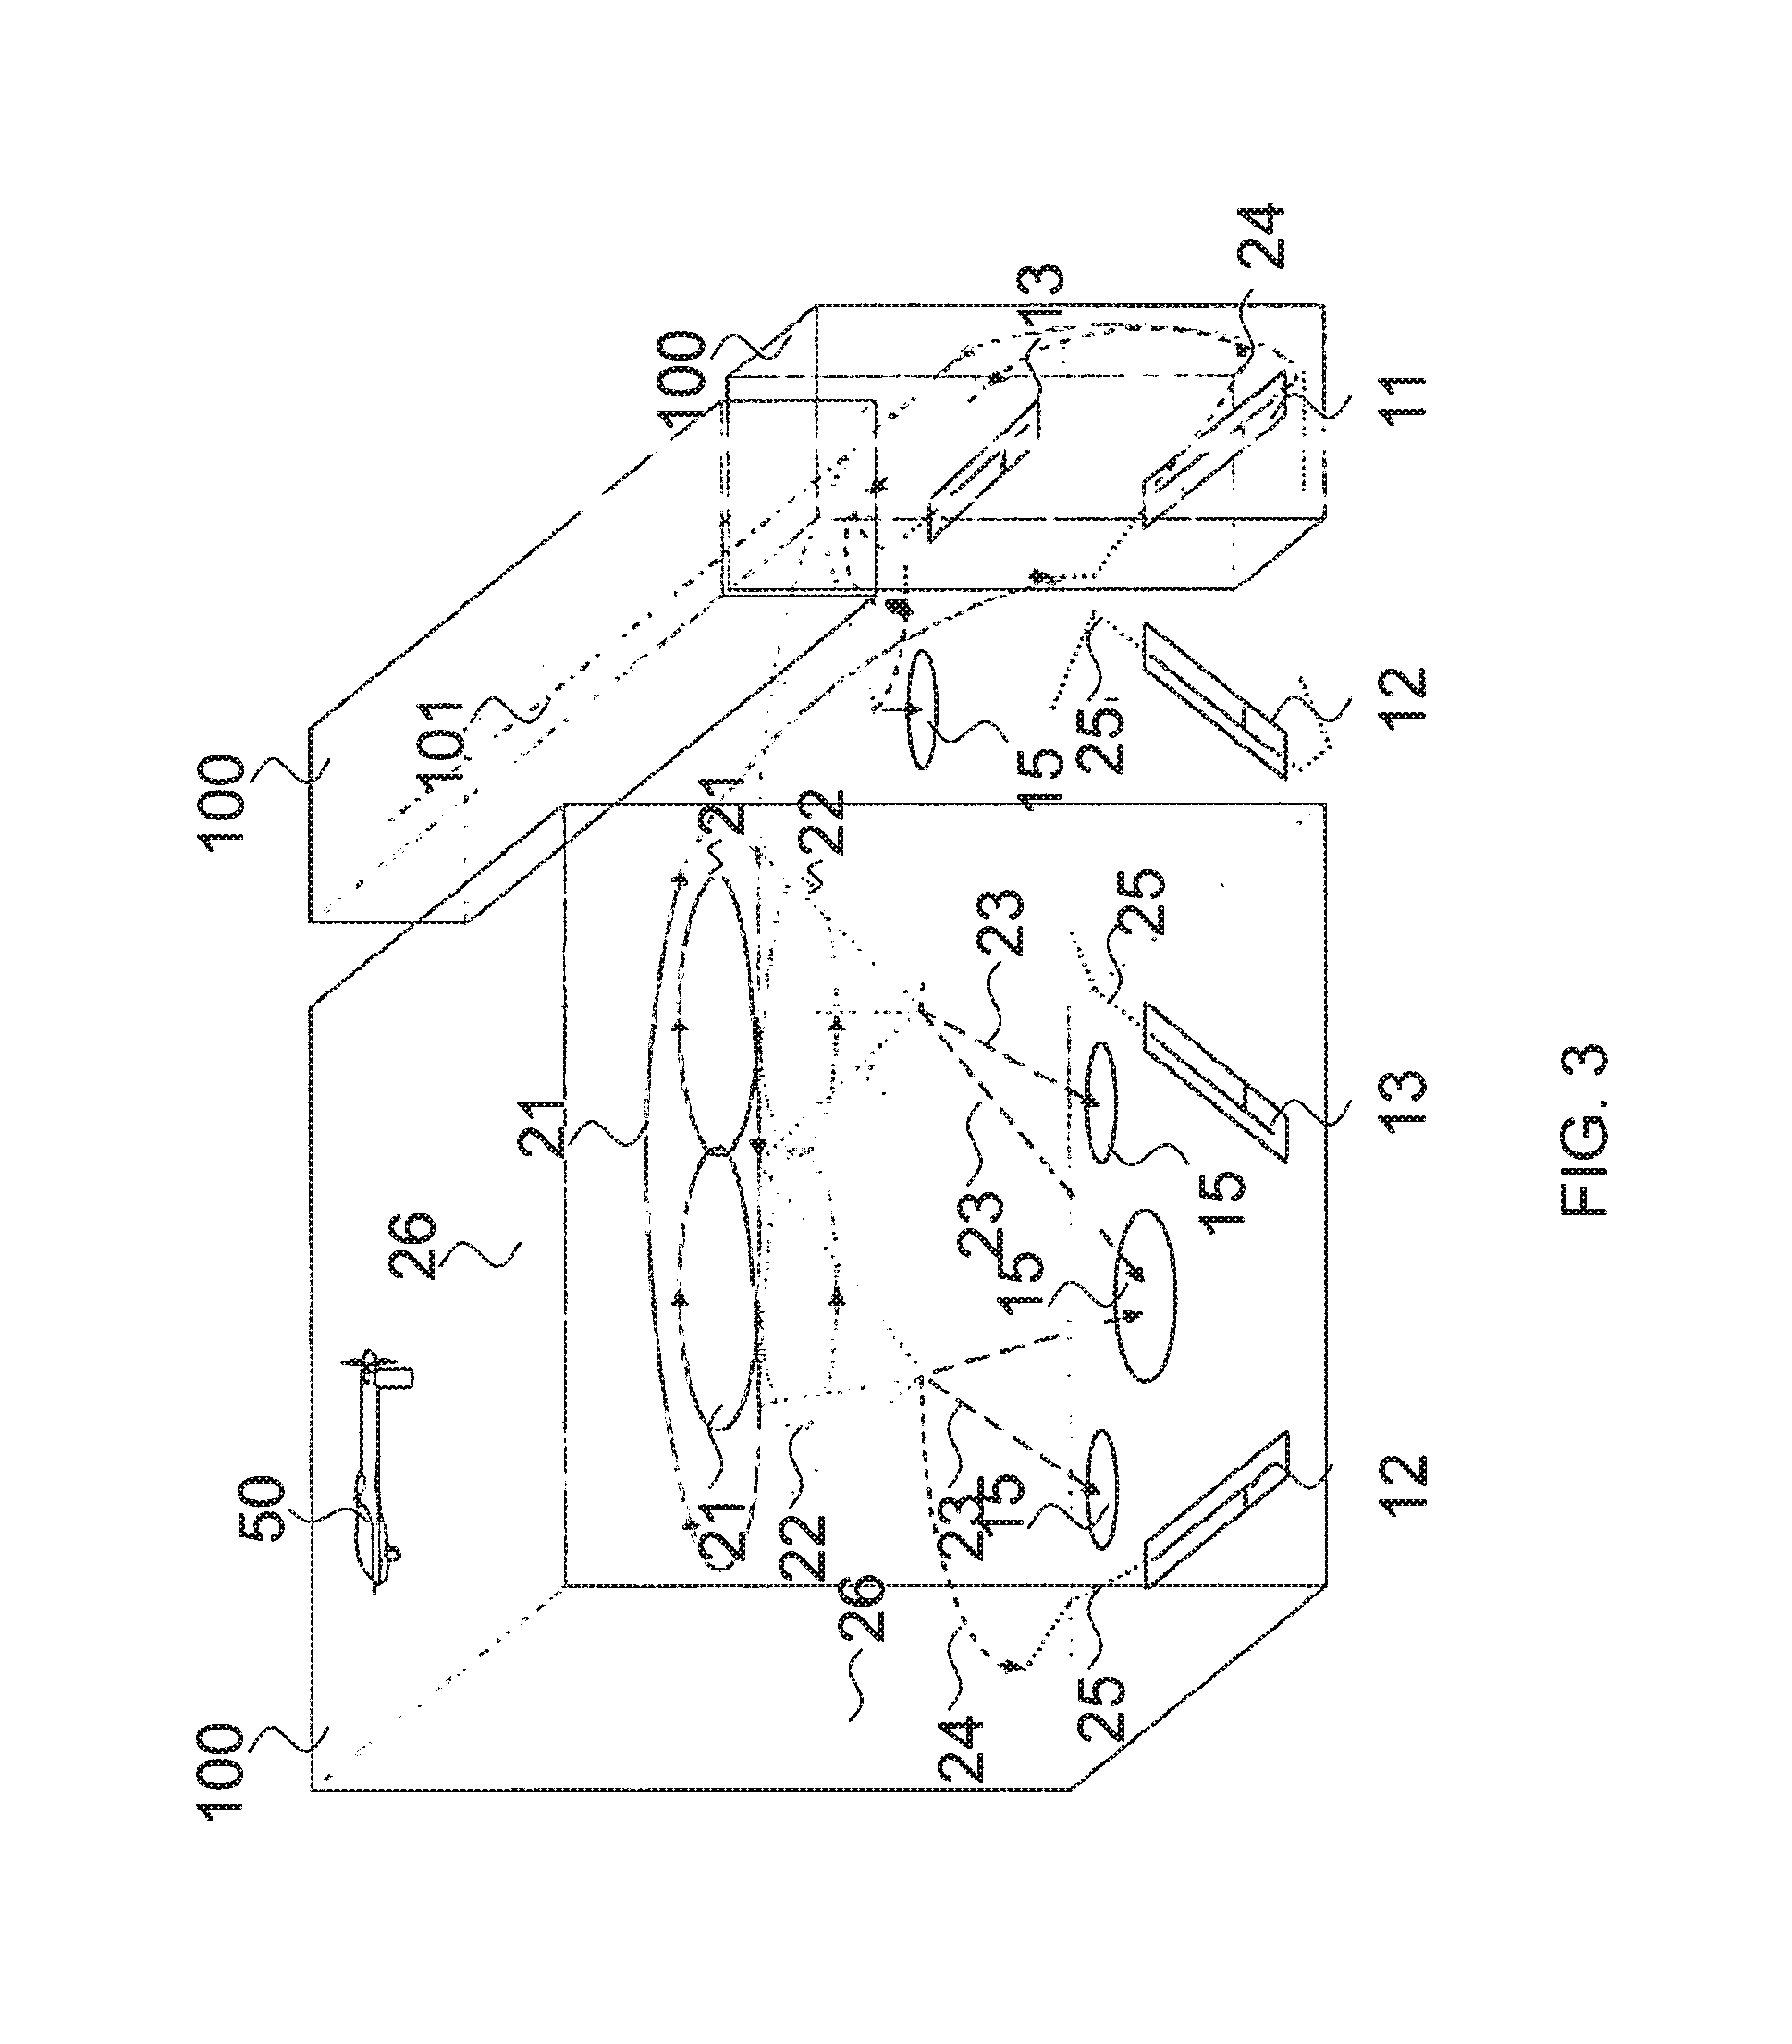 Method for autonomous controlling of a remote controlled aerial vehicle and corresponding system